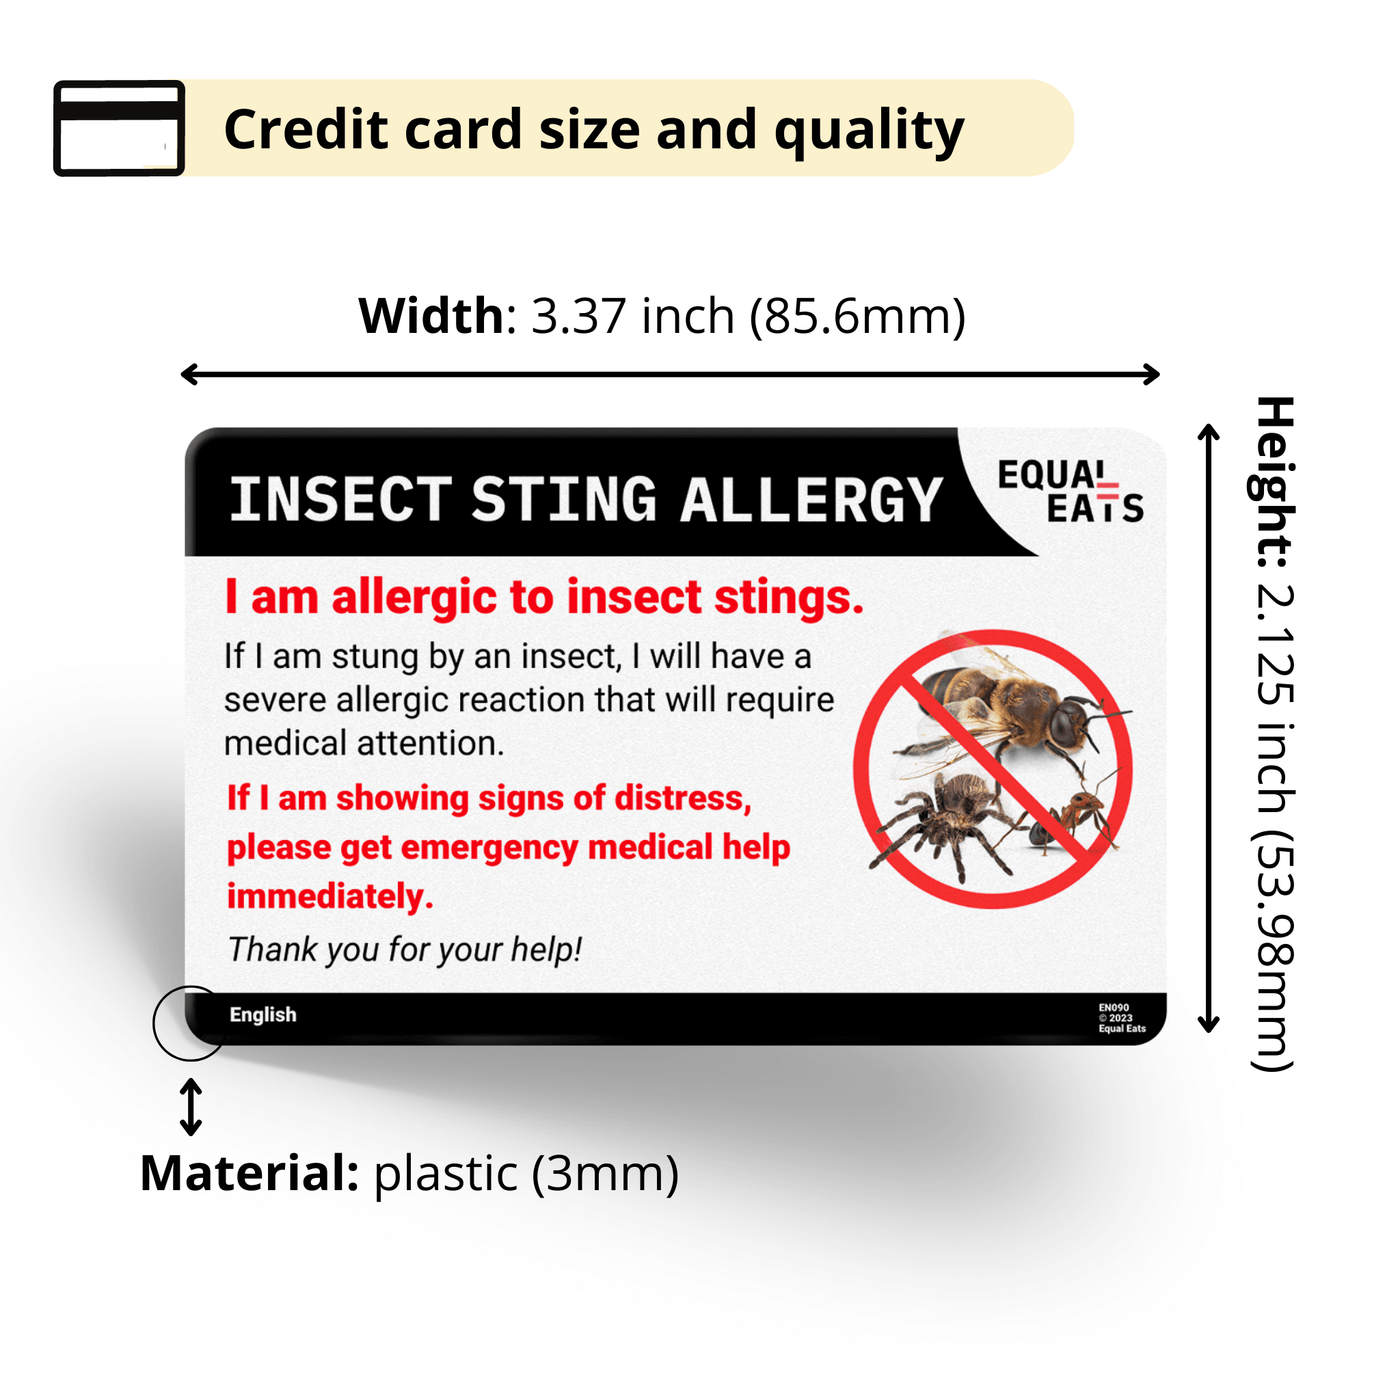 Hindi Insect Sting Allergy Card